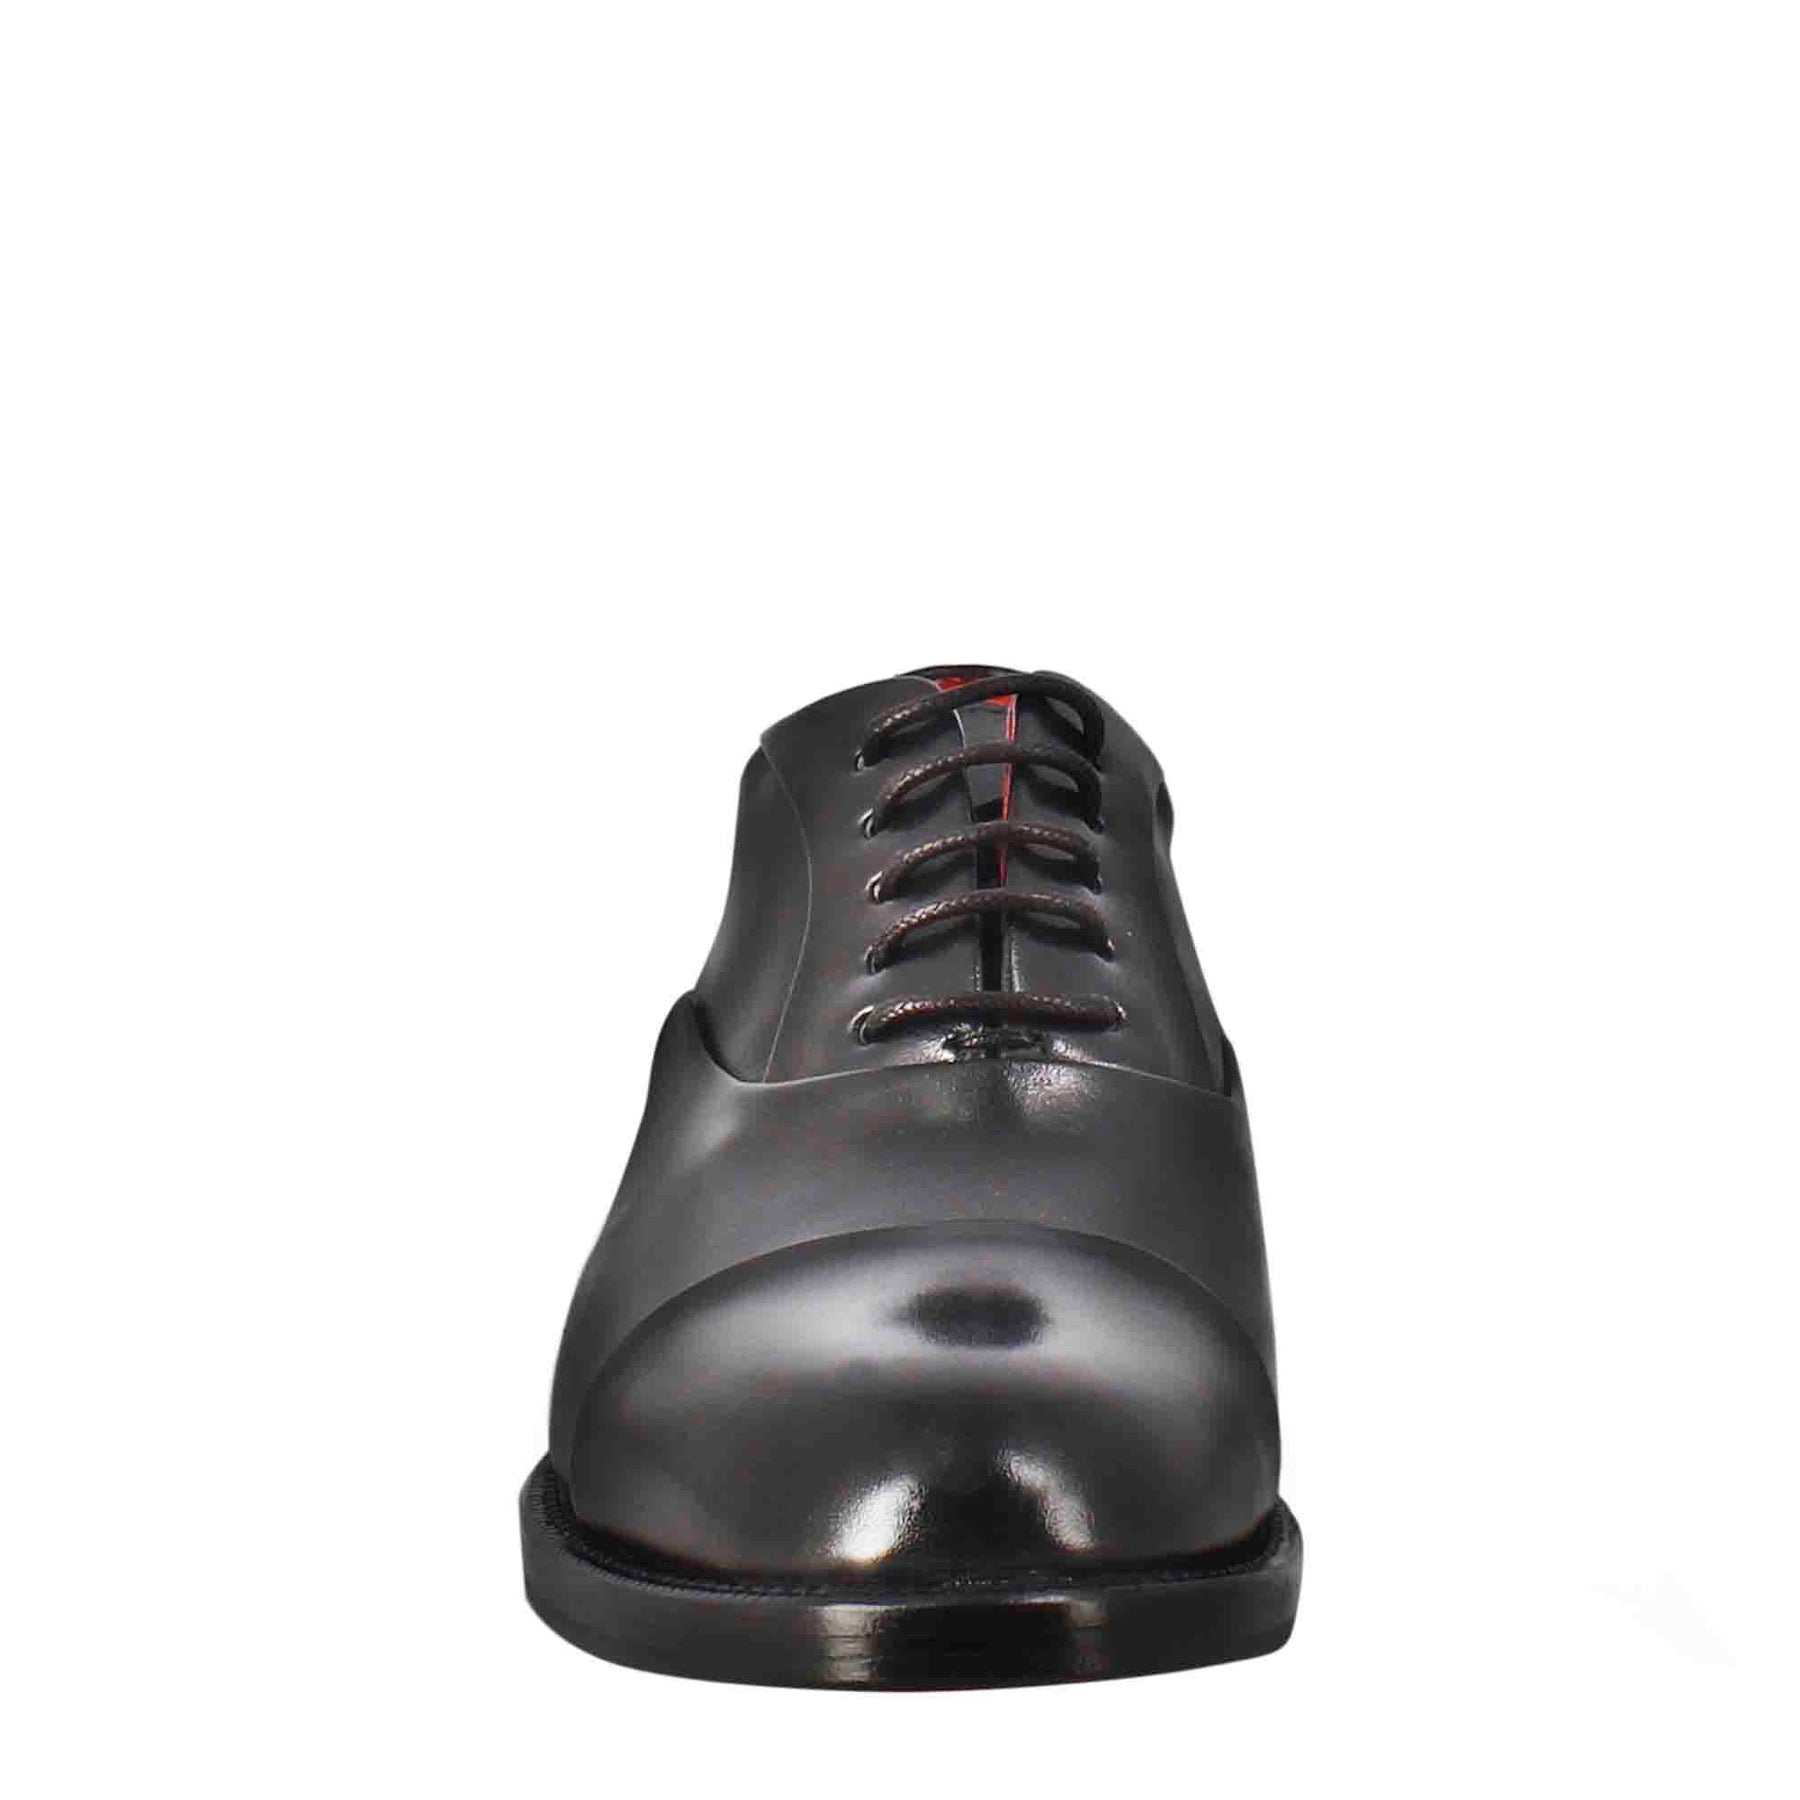 Women's brogues sewn on the toe in black leather